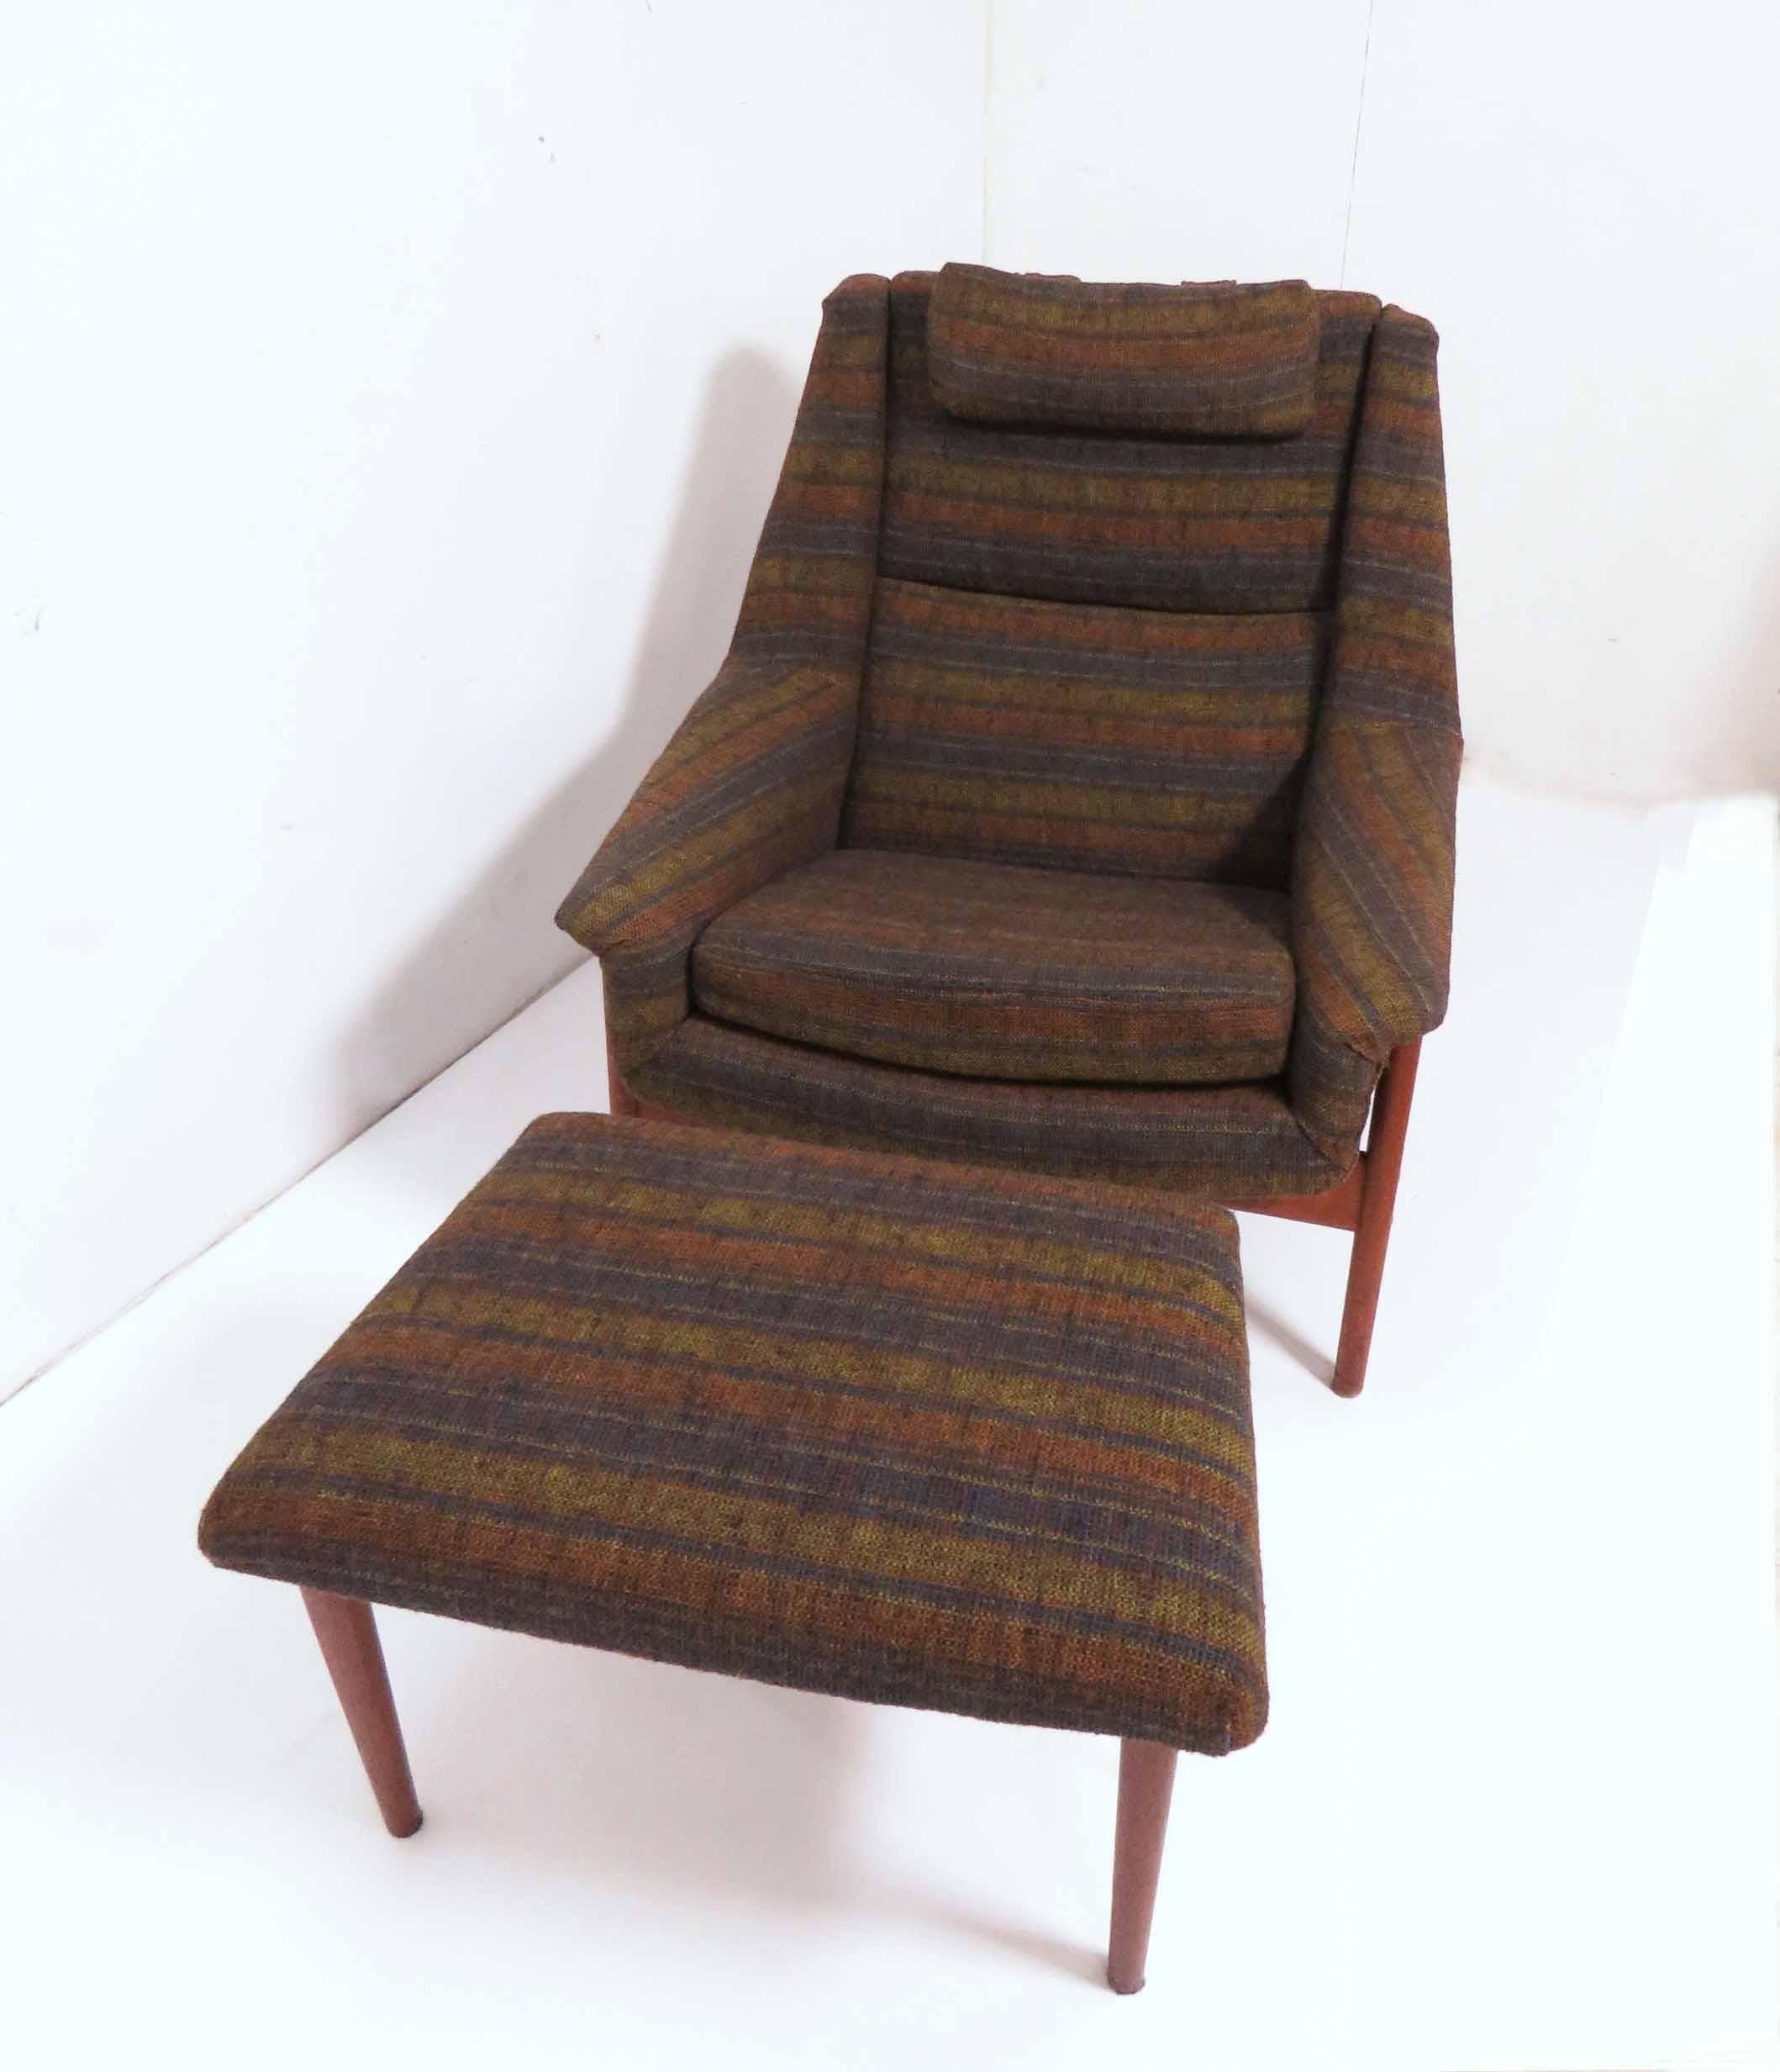 Mid-20th Century Folke Ohlsson for DUX Lounge Chair with Ottoman, circa 1960s